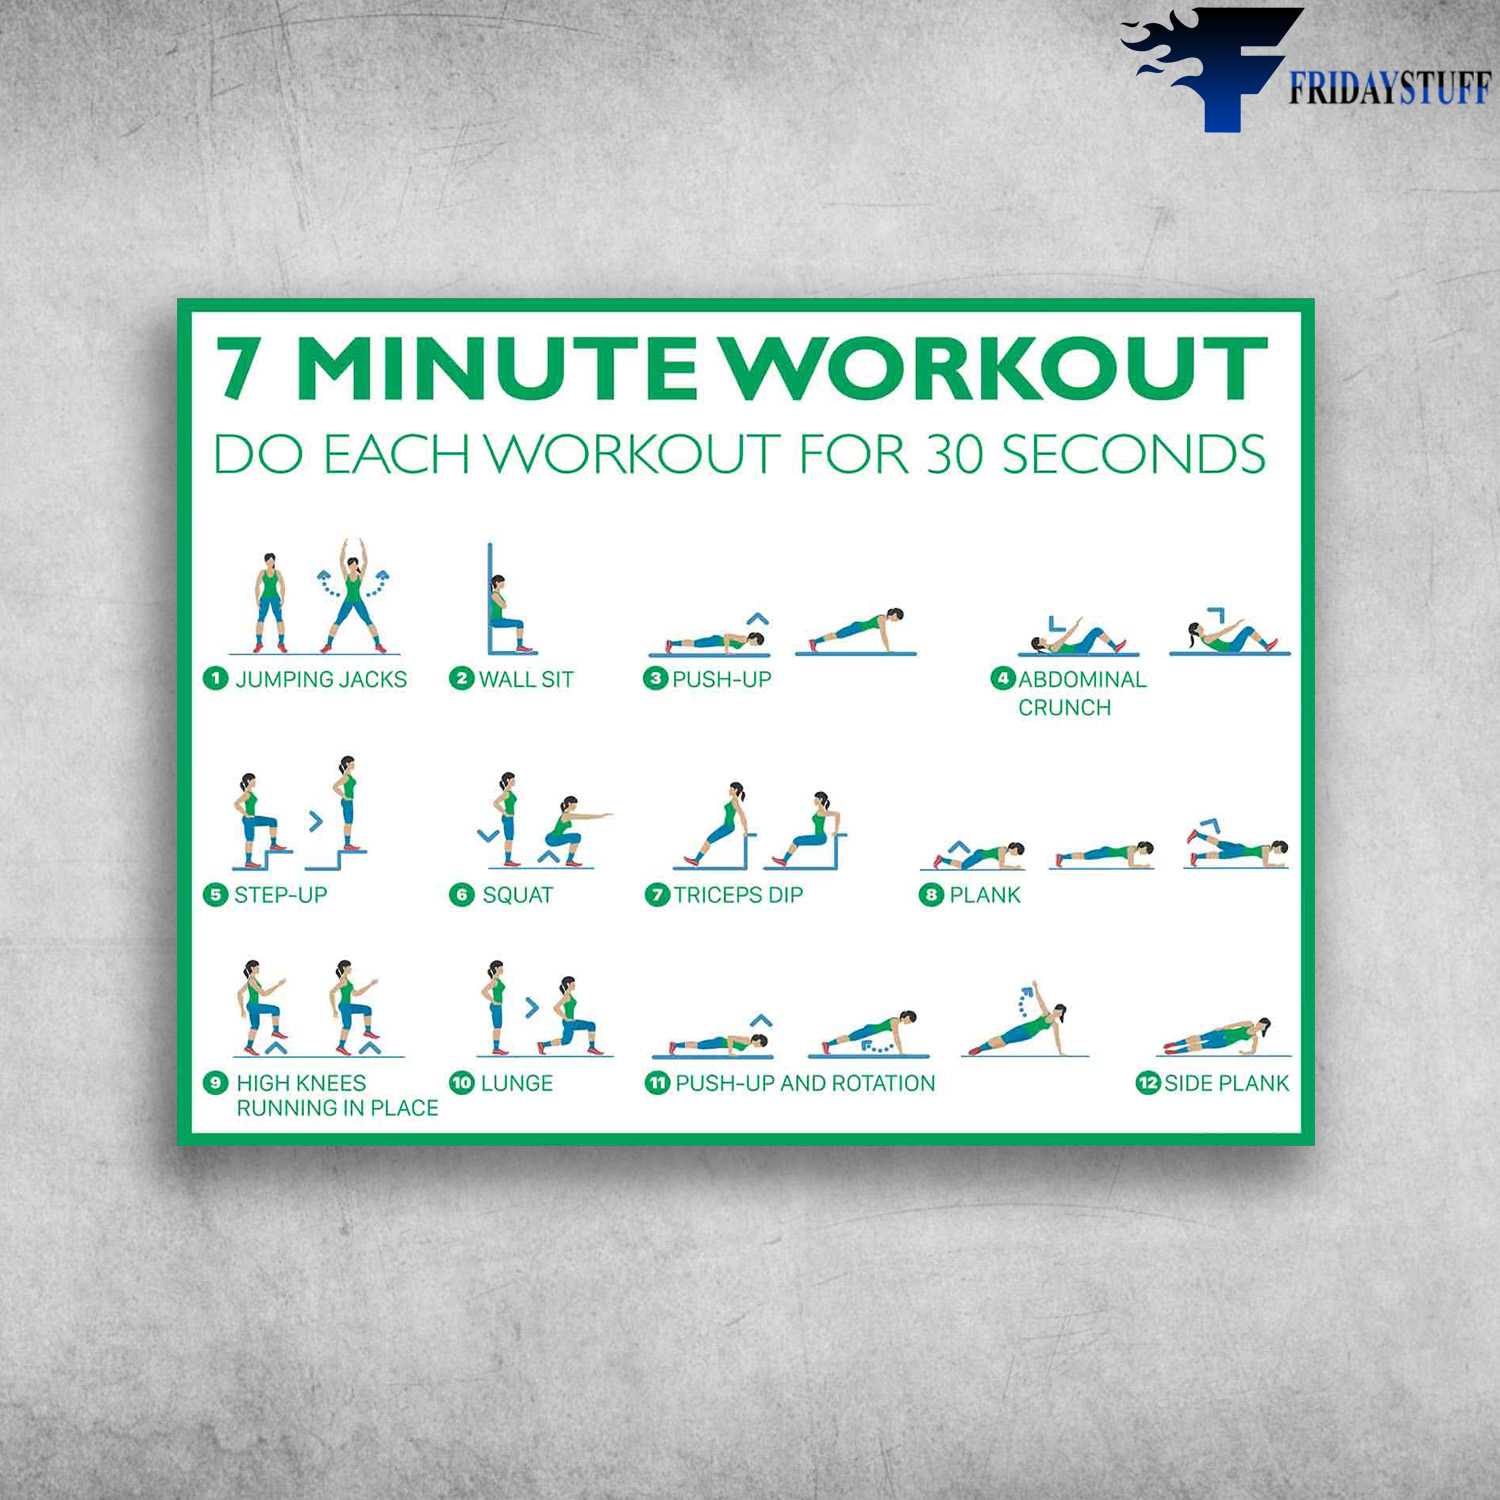 Be Healthy - 7 Minute Workout, Do Each Workout For 30 Seconds, Jumping Jacks, Wall Sit, Push-Up, Abdominal Crunch